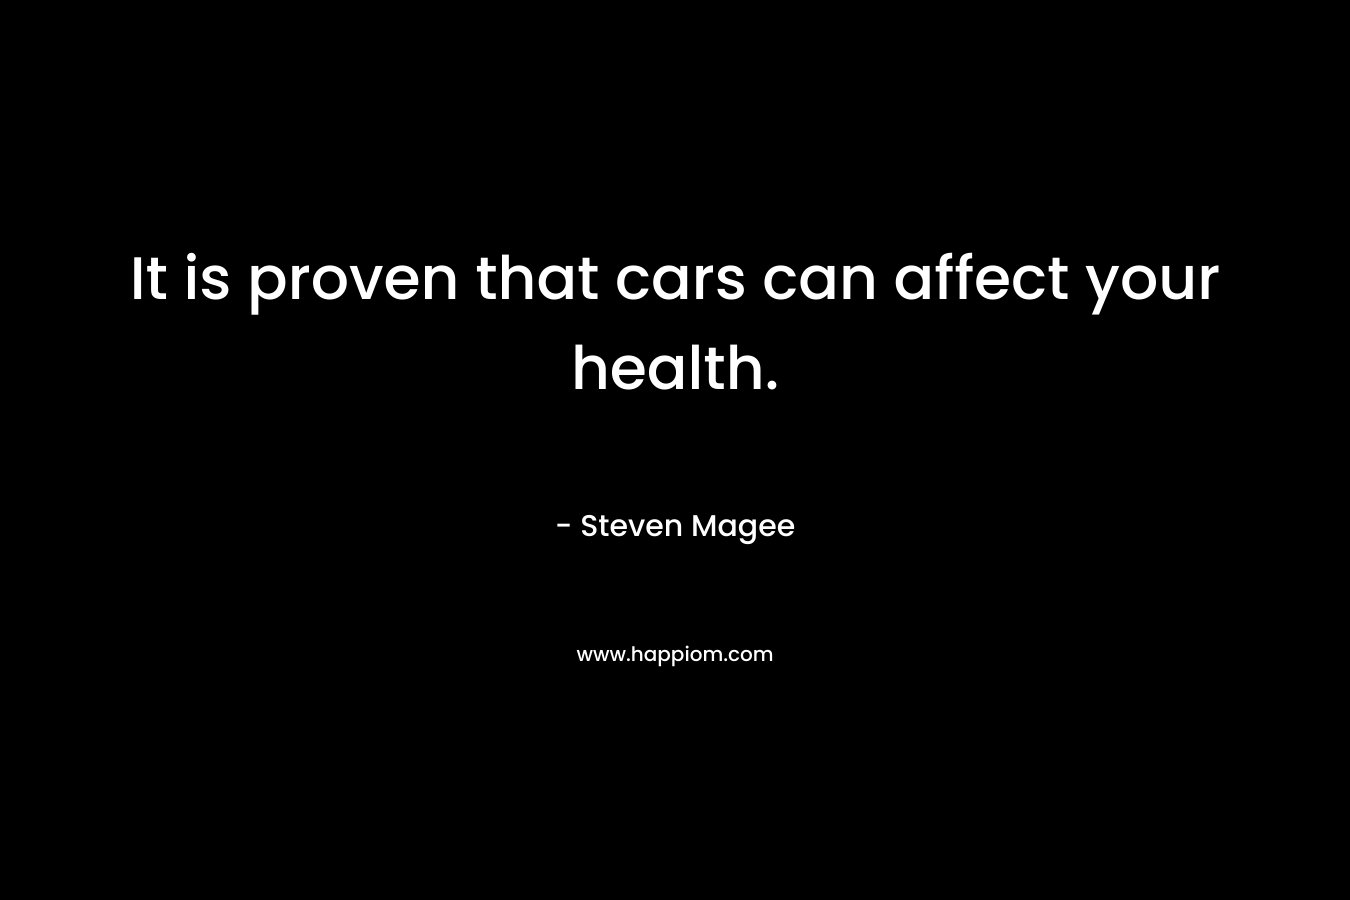 It is proven that cars can affect your health. – Steven Magee